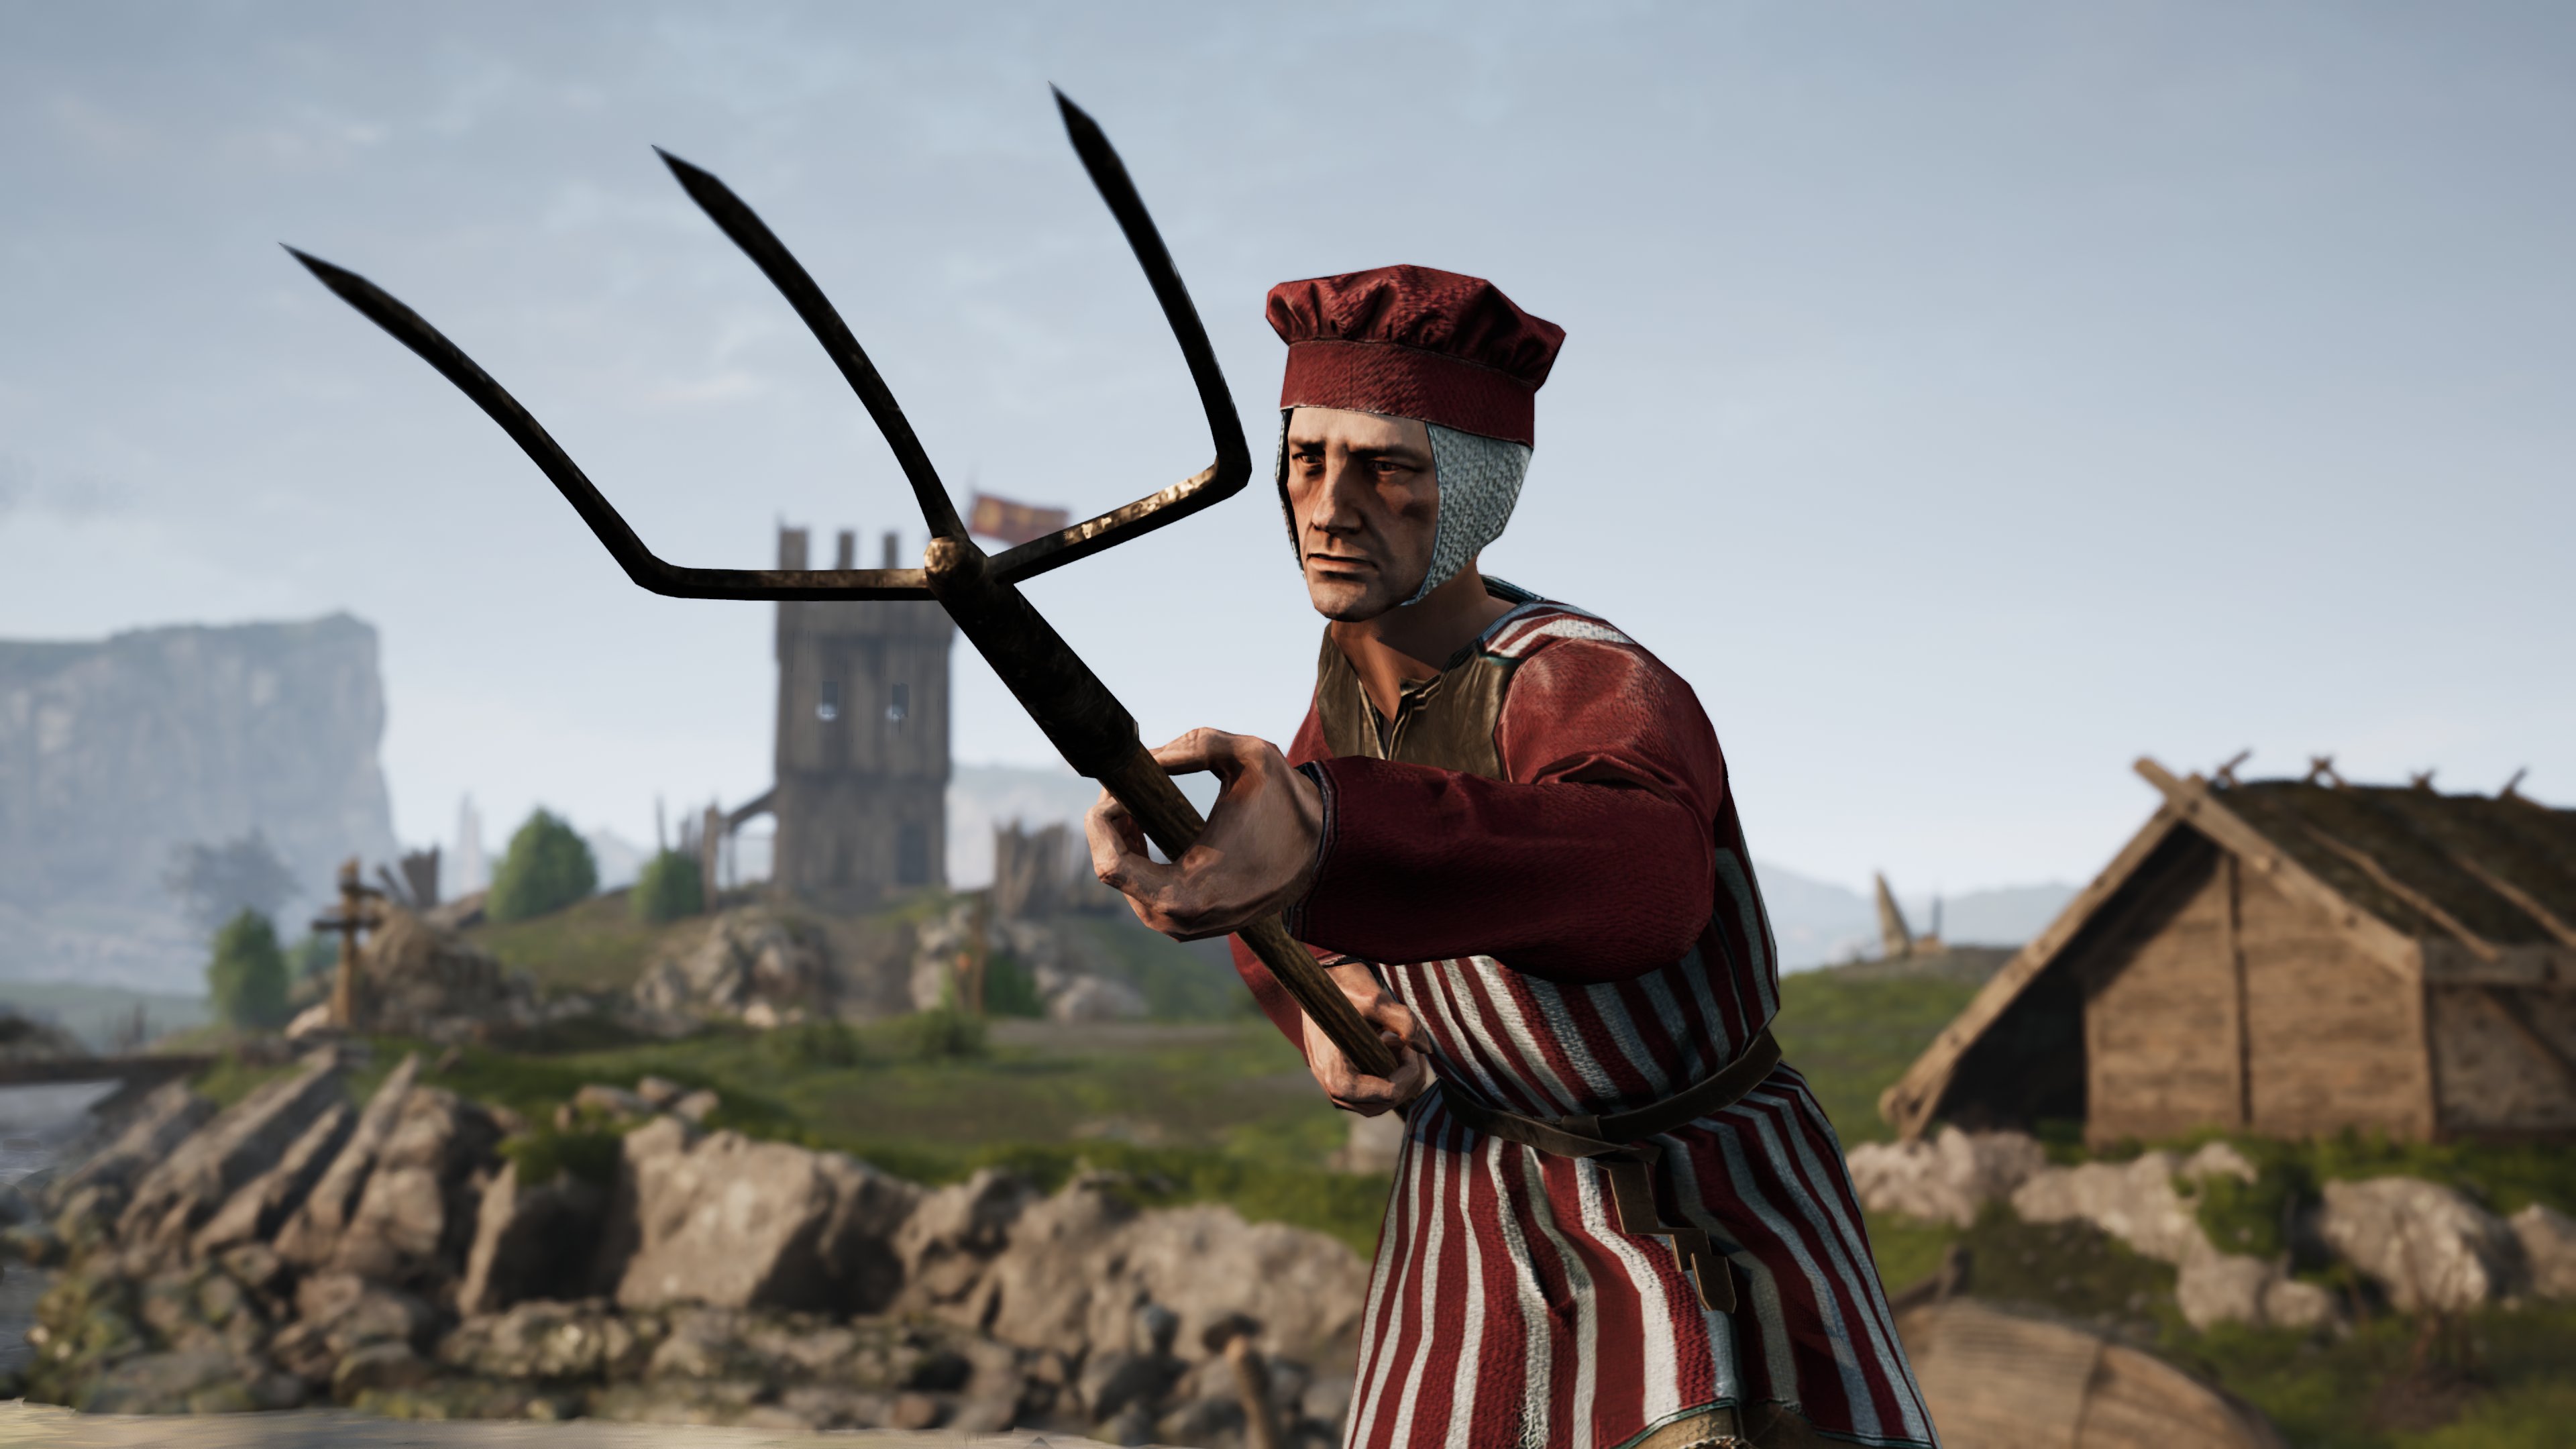 Chivalry 2 Is Free To Play Right Now For The Whole Weekend